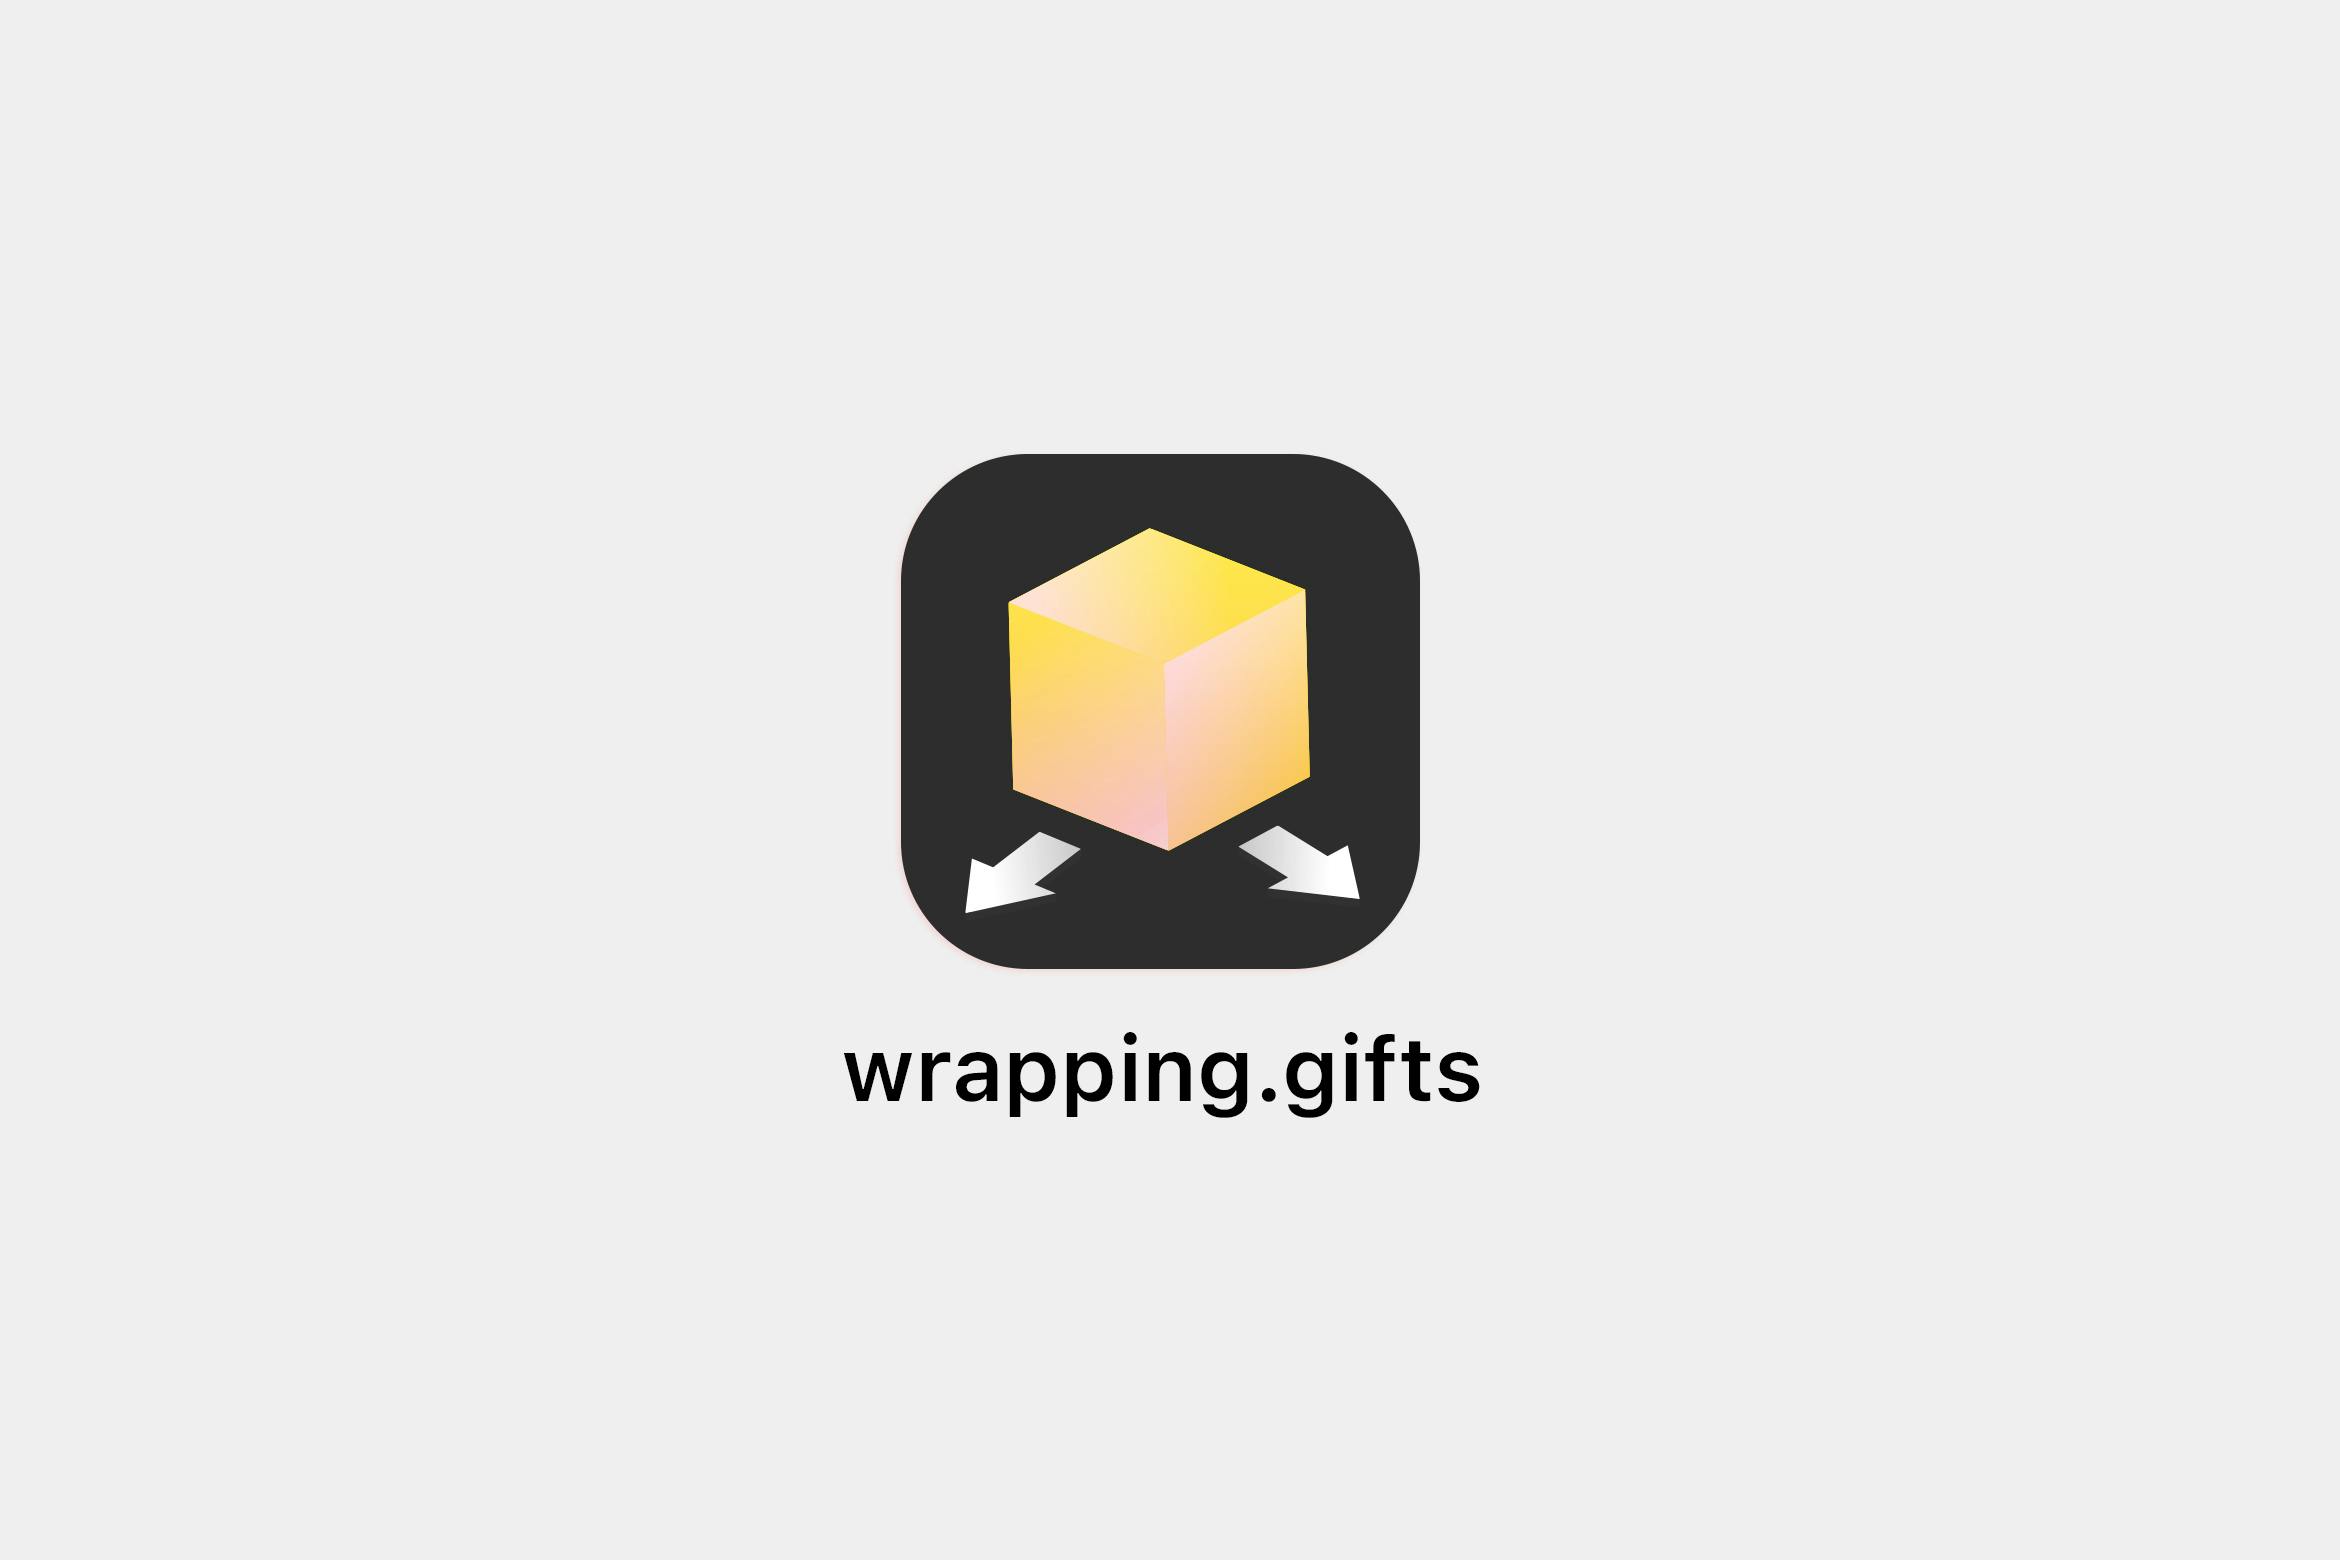 WrappingGifts